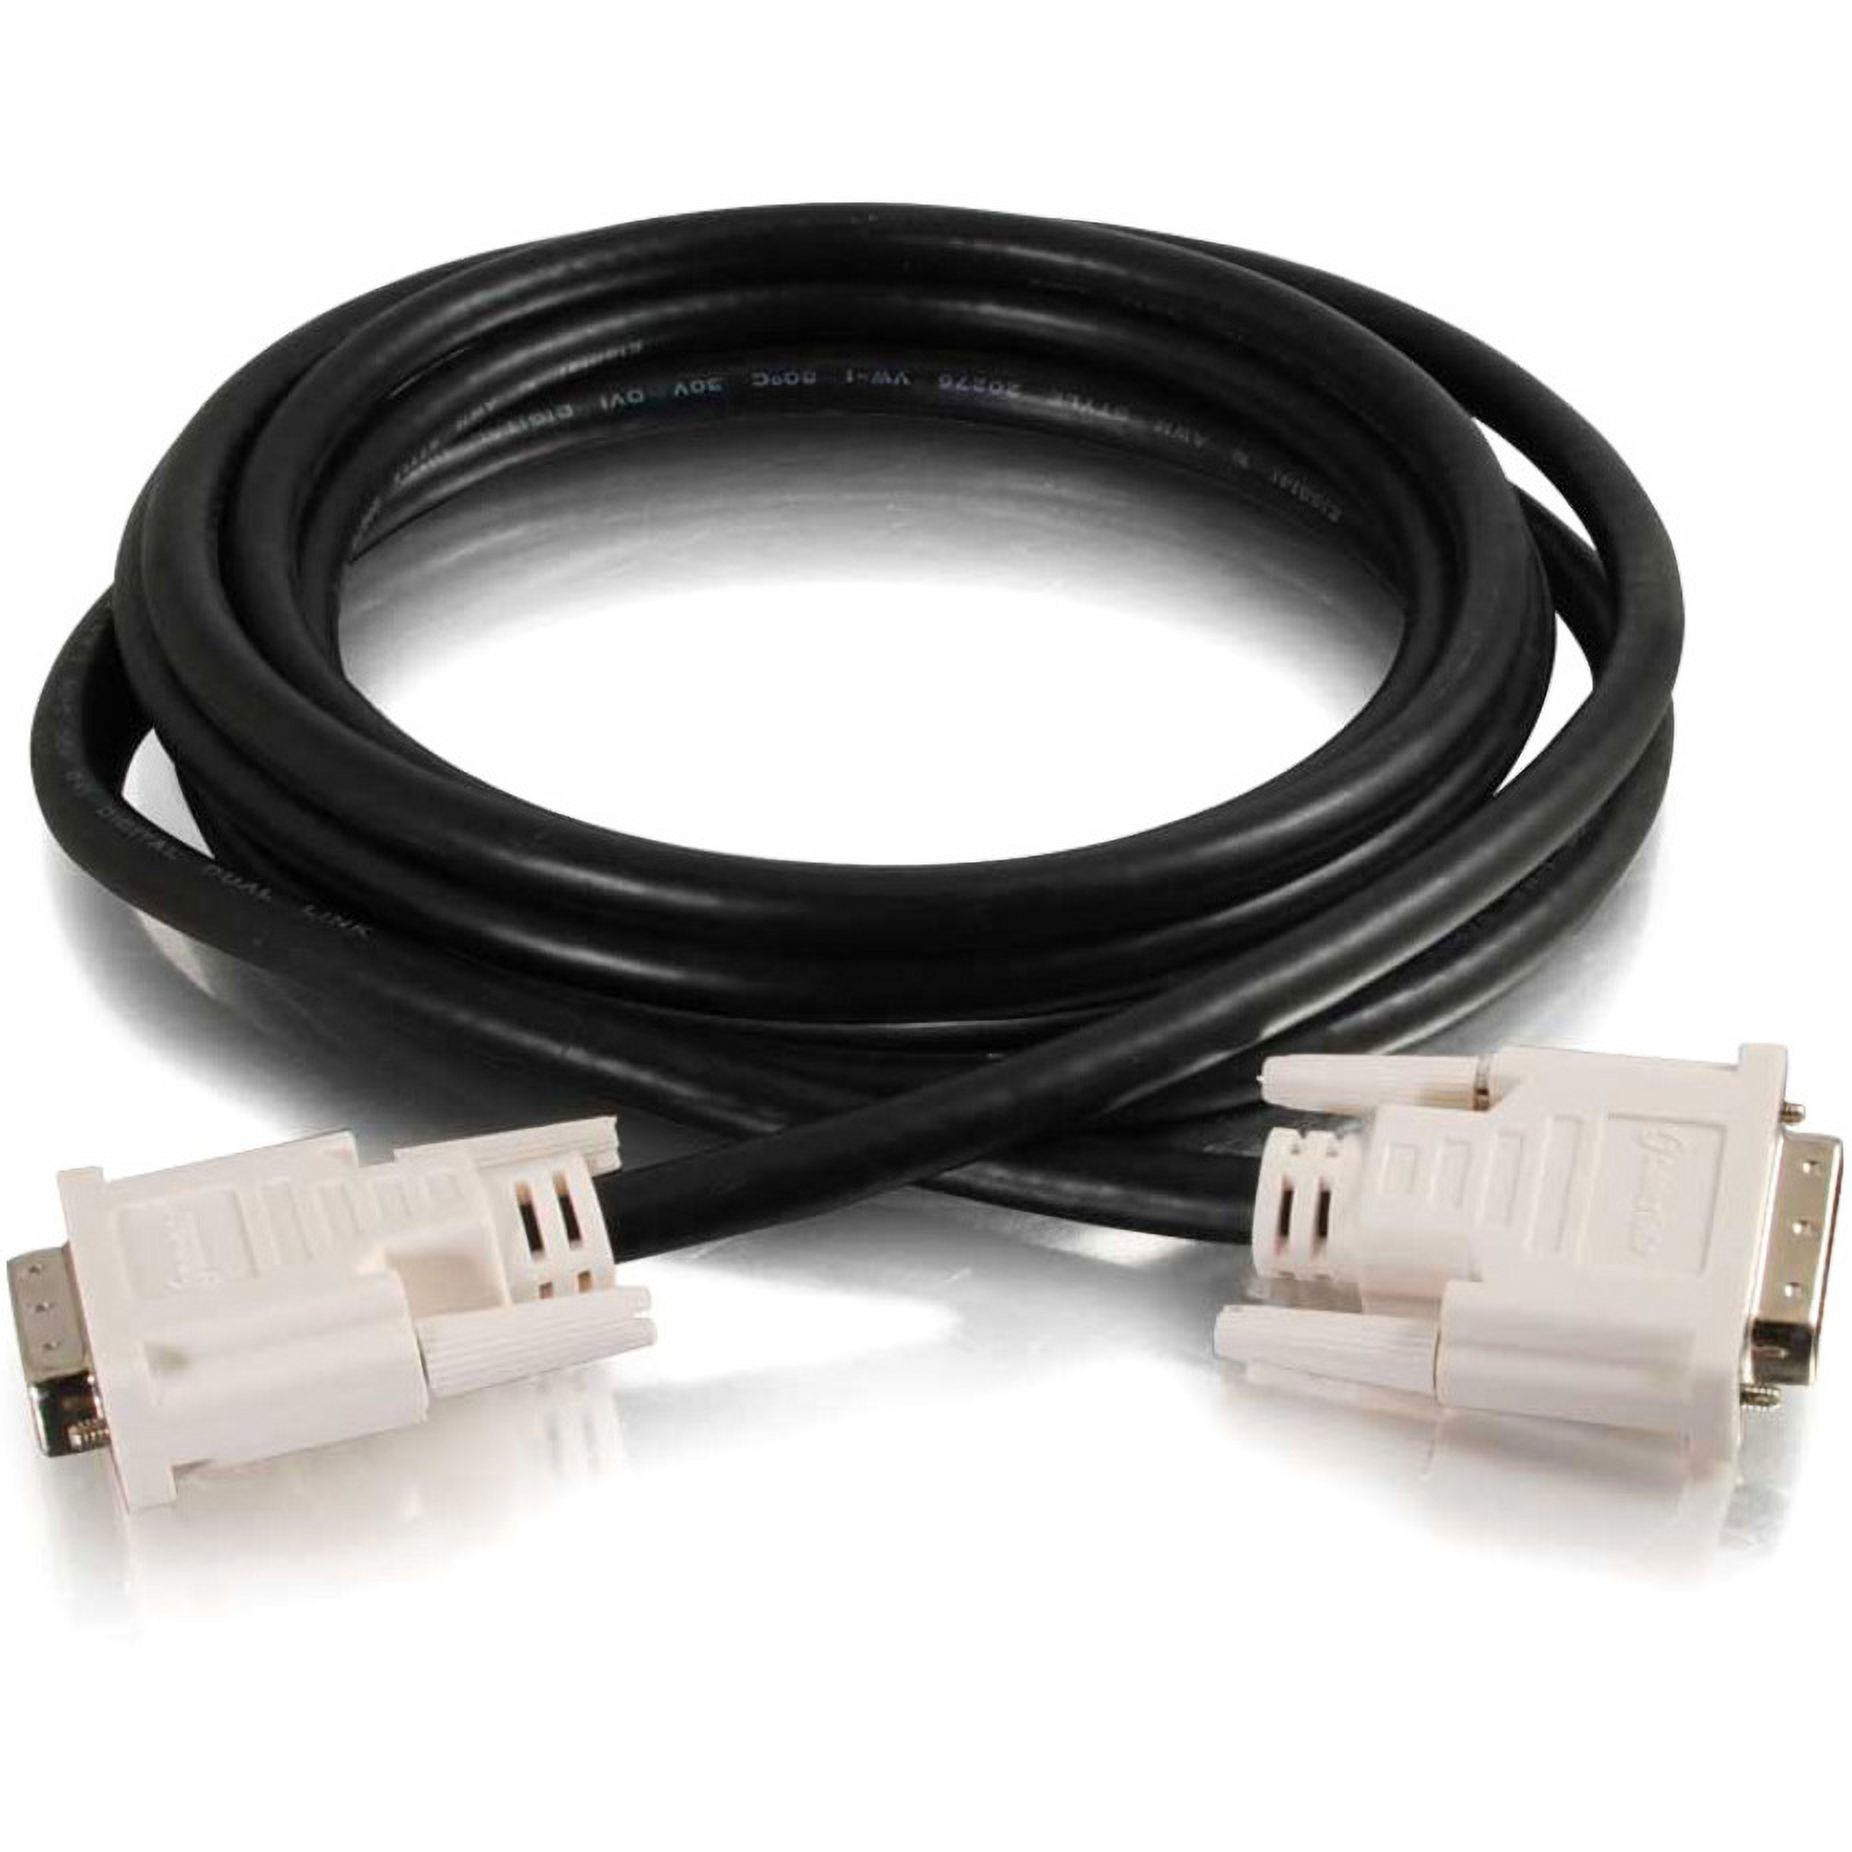 Pre-Owned Cables To Go 29526 16.40 Feet Combined DVI-I Digital/Analog Video Cable - Black Like New - image 5 of 5